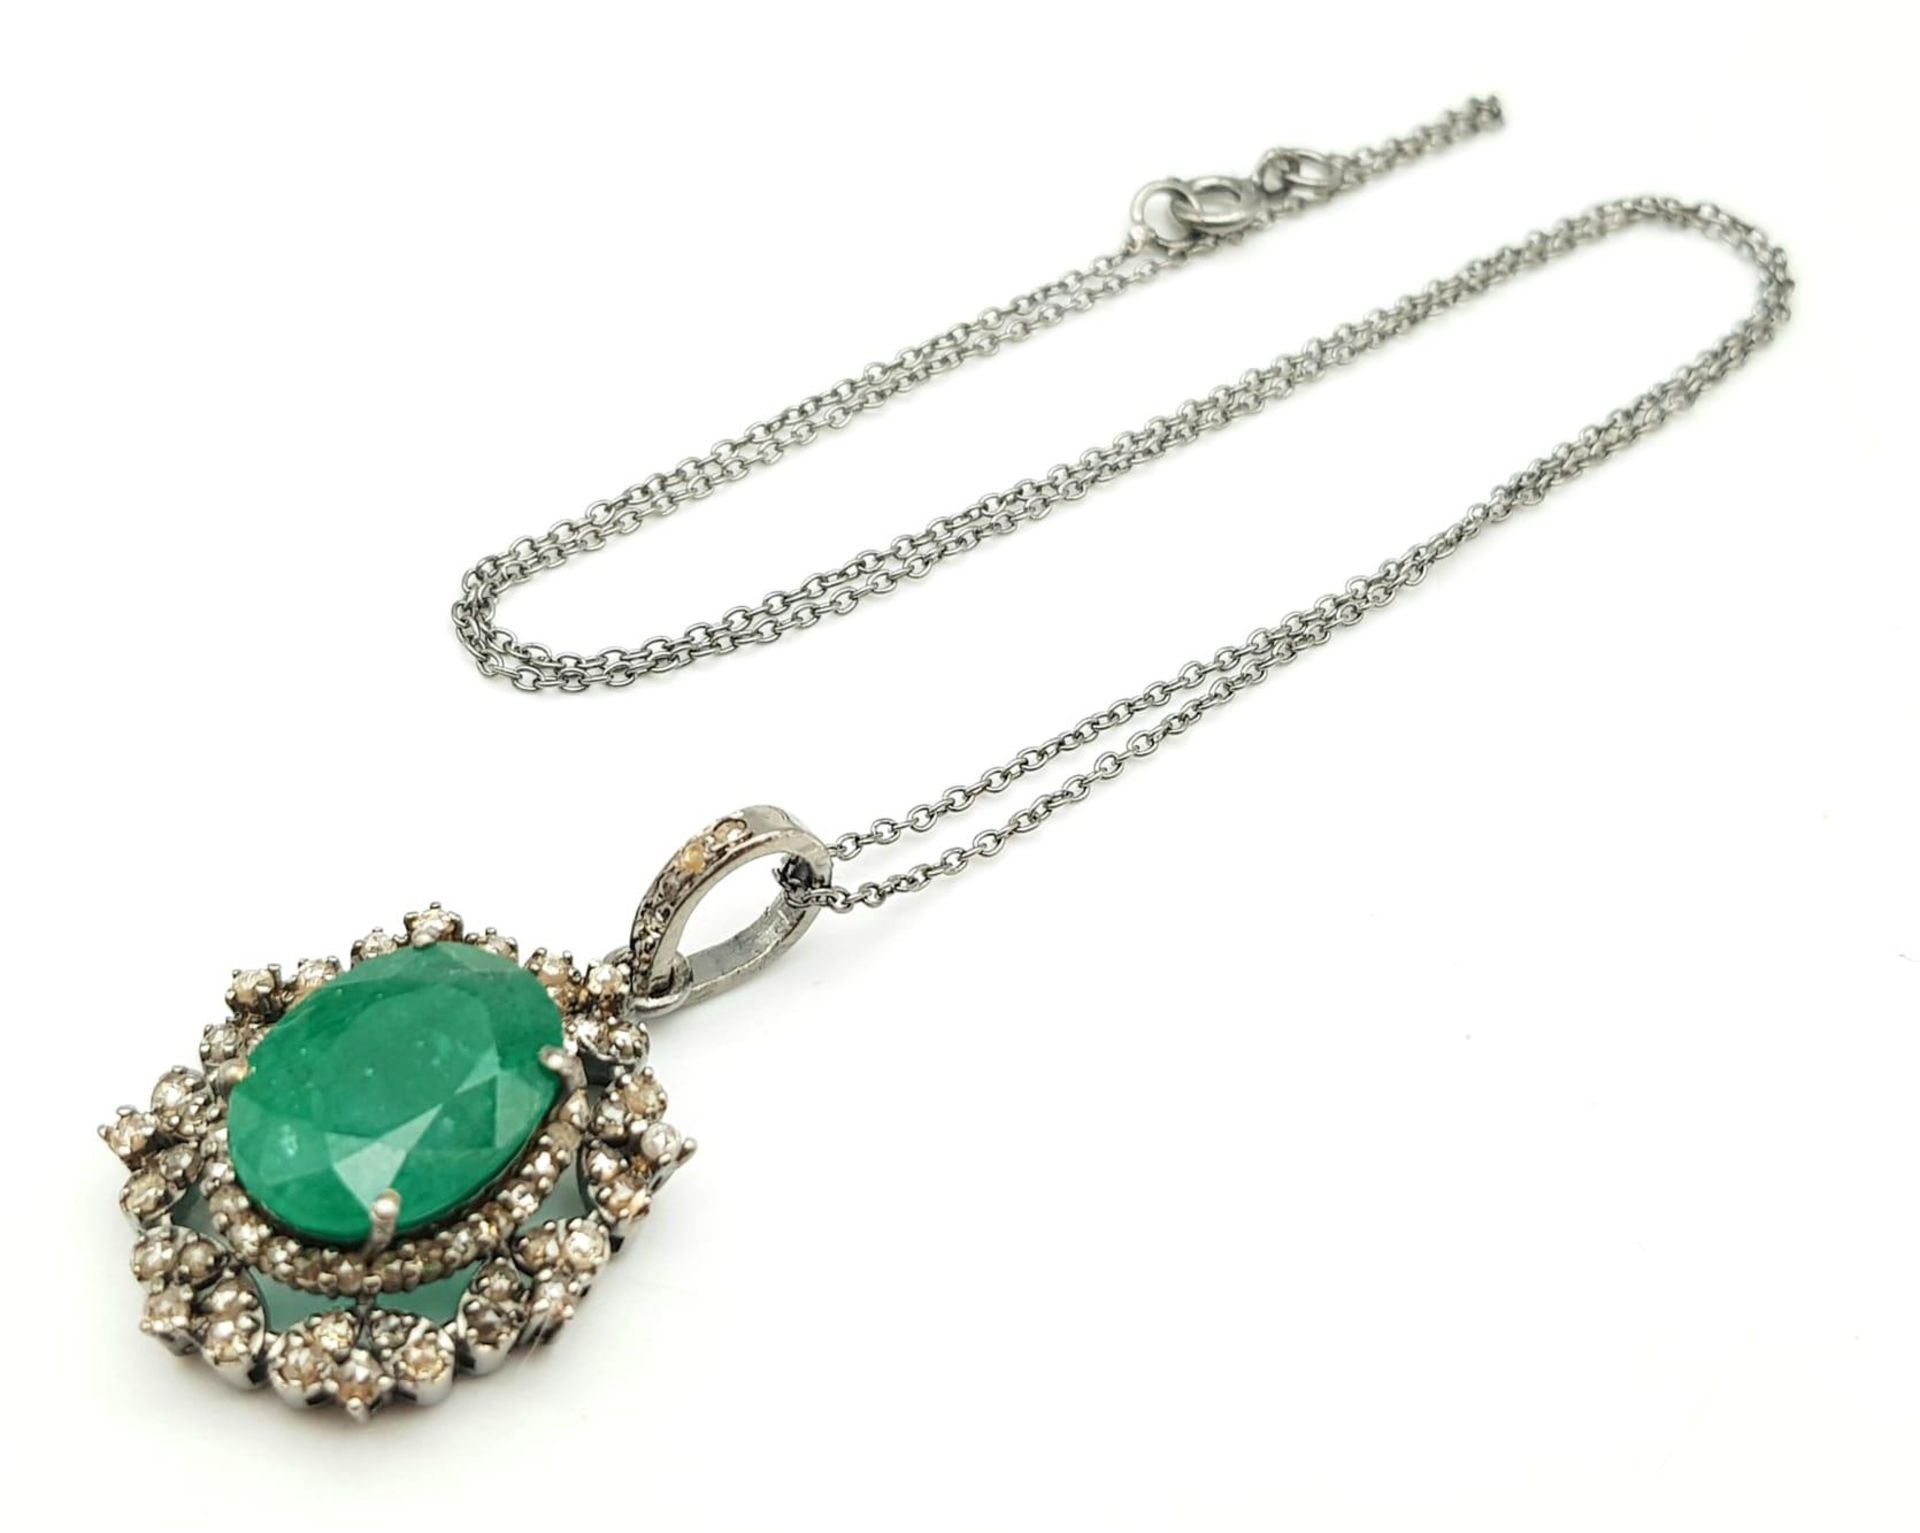 An Emerald Pendant with Diamond Surround on 925 Silver and Silver Chain. 6.90ct emerald, 1.25ctw - Image 5 of 9